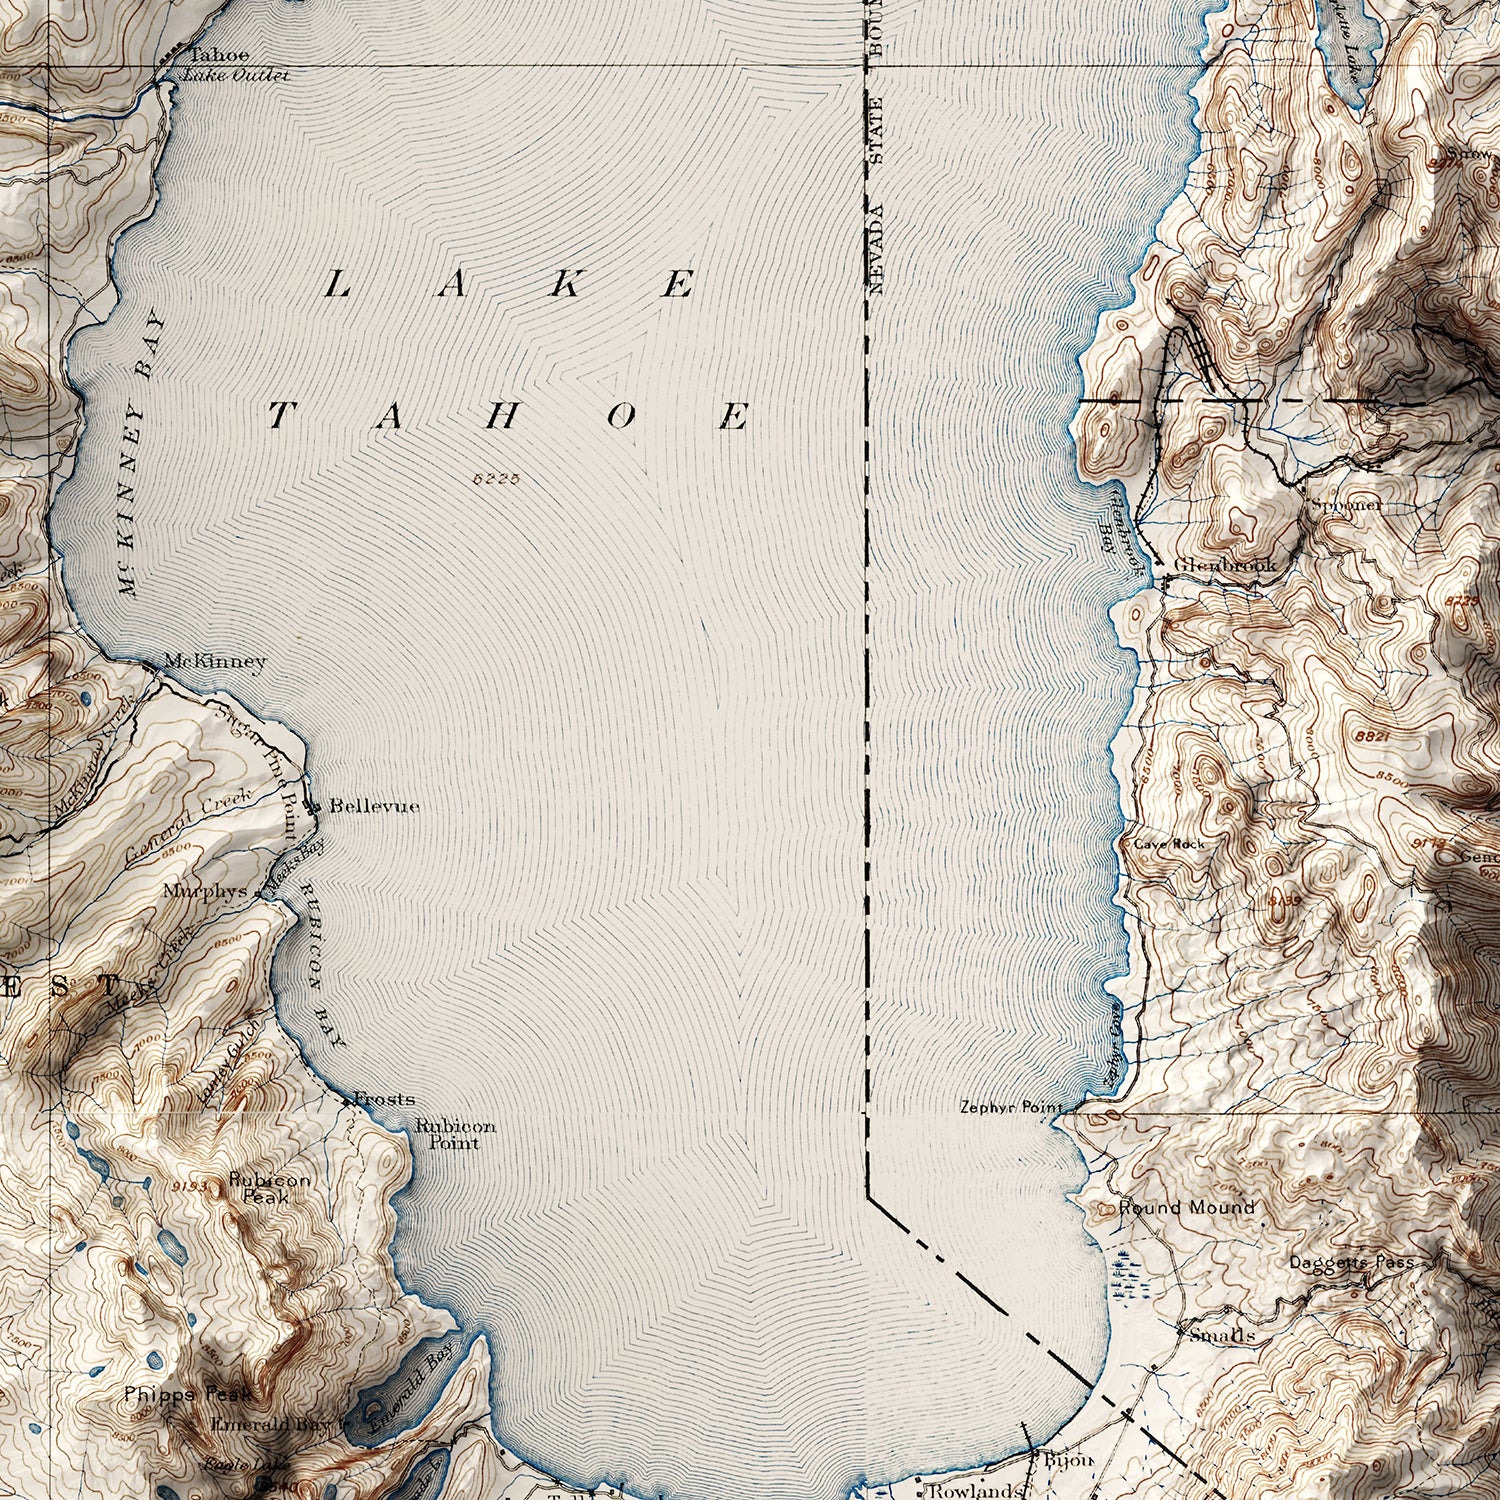 Lake Tahoe - Vintage Shaded Relief Map (1896)